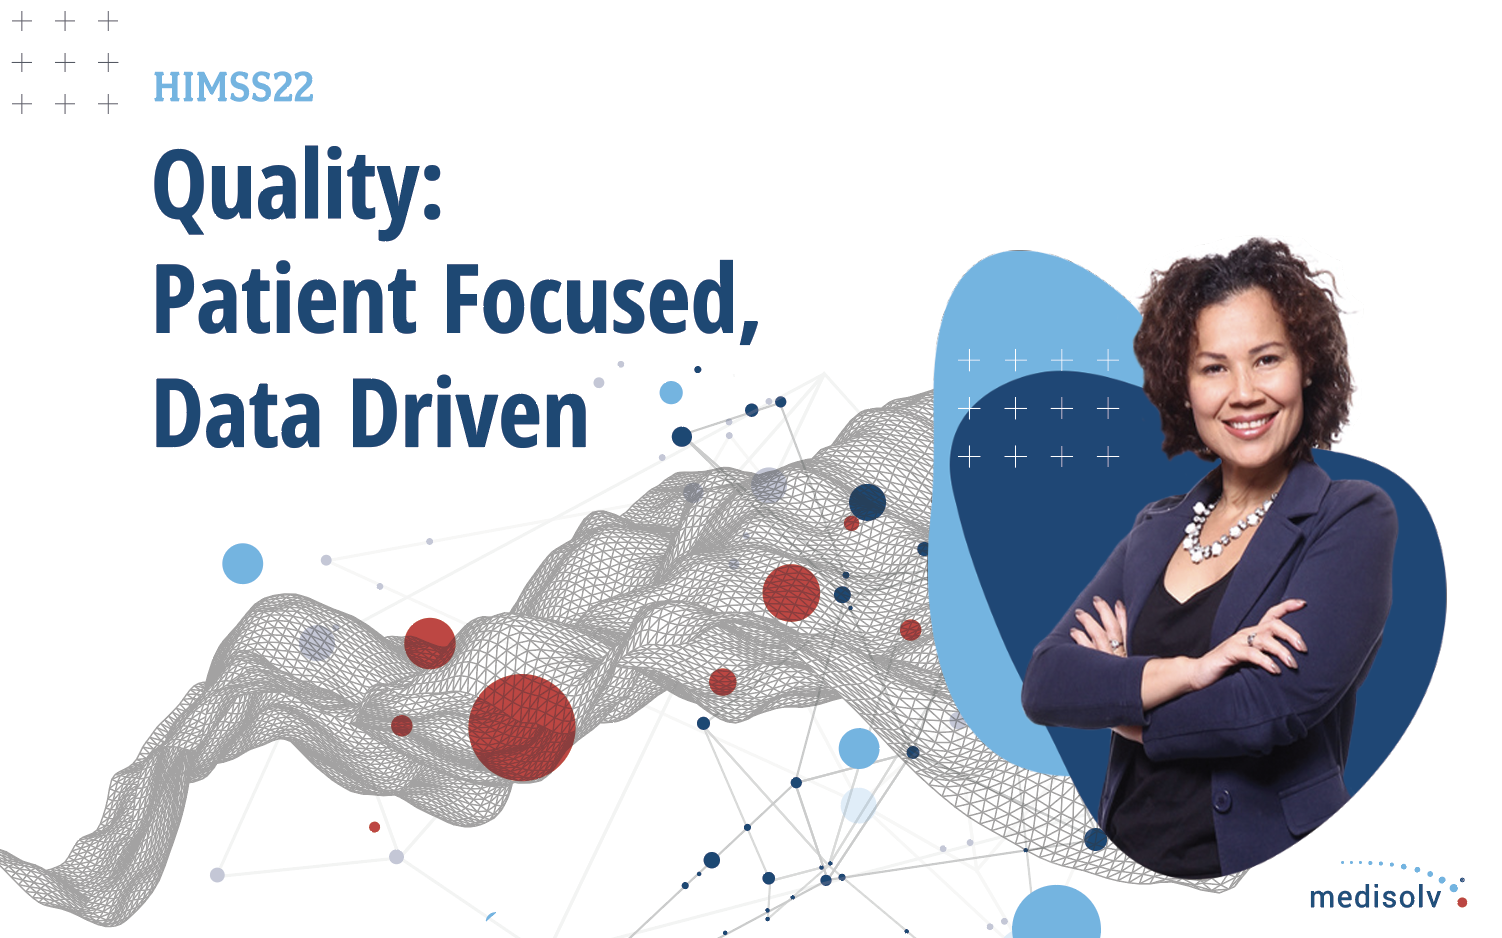 Quality: Patient Focused, Data Driven